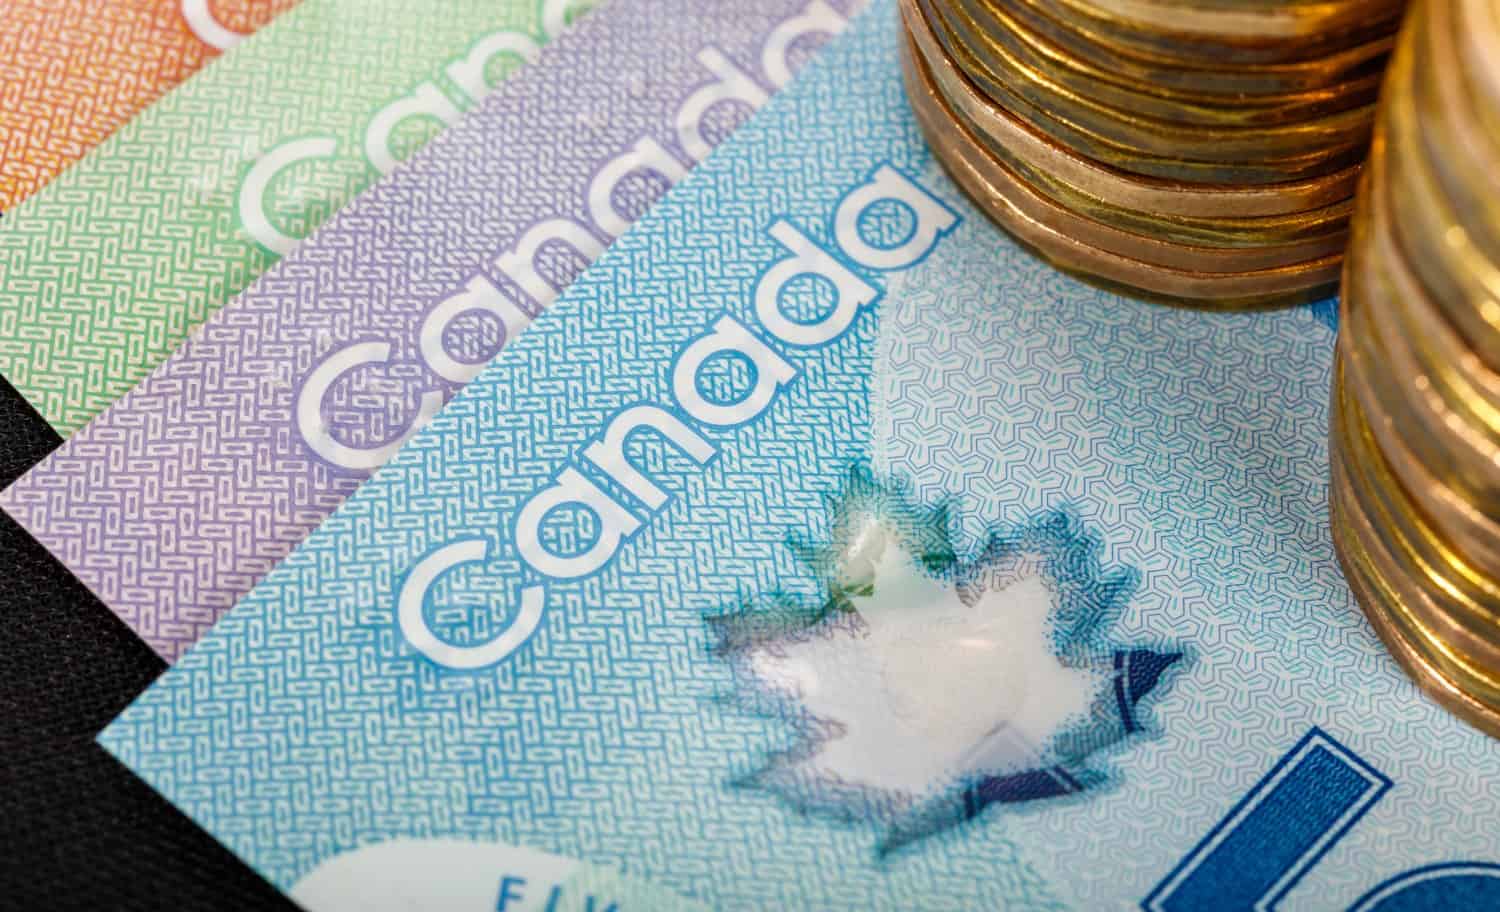 Joint Venture Launches Canadian Dollar-Pegged Stablecoin for Financial Services 1